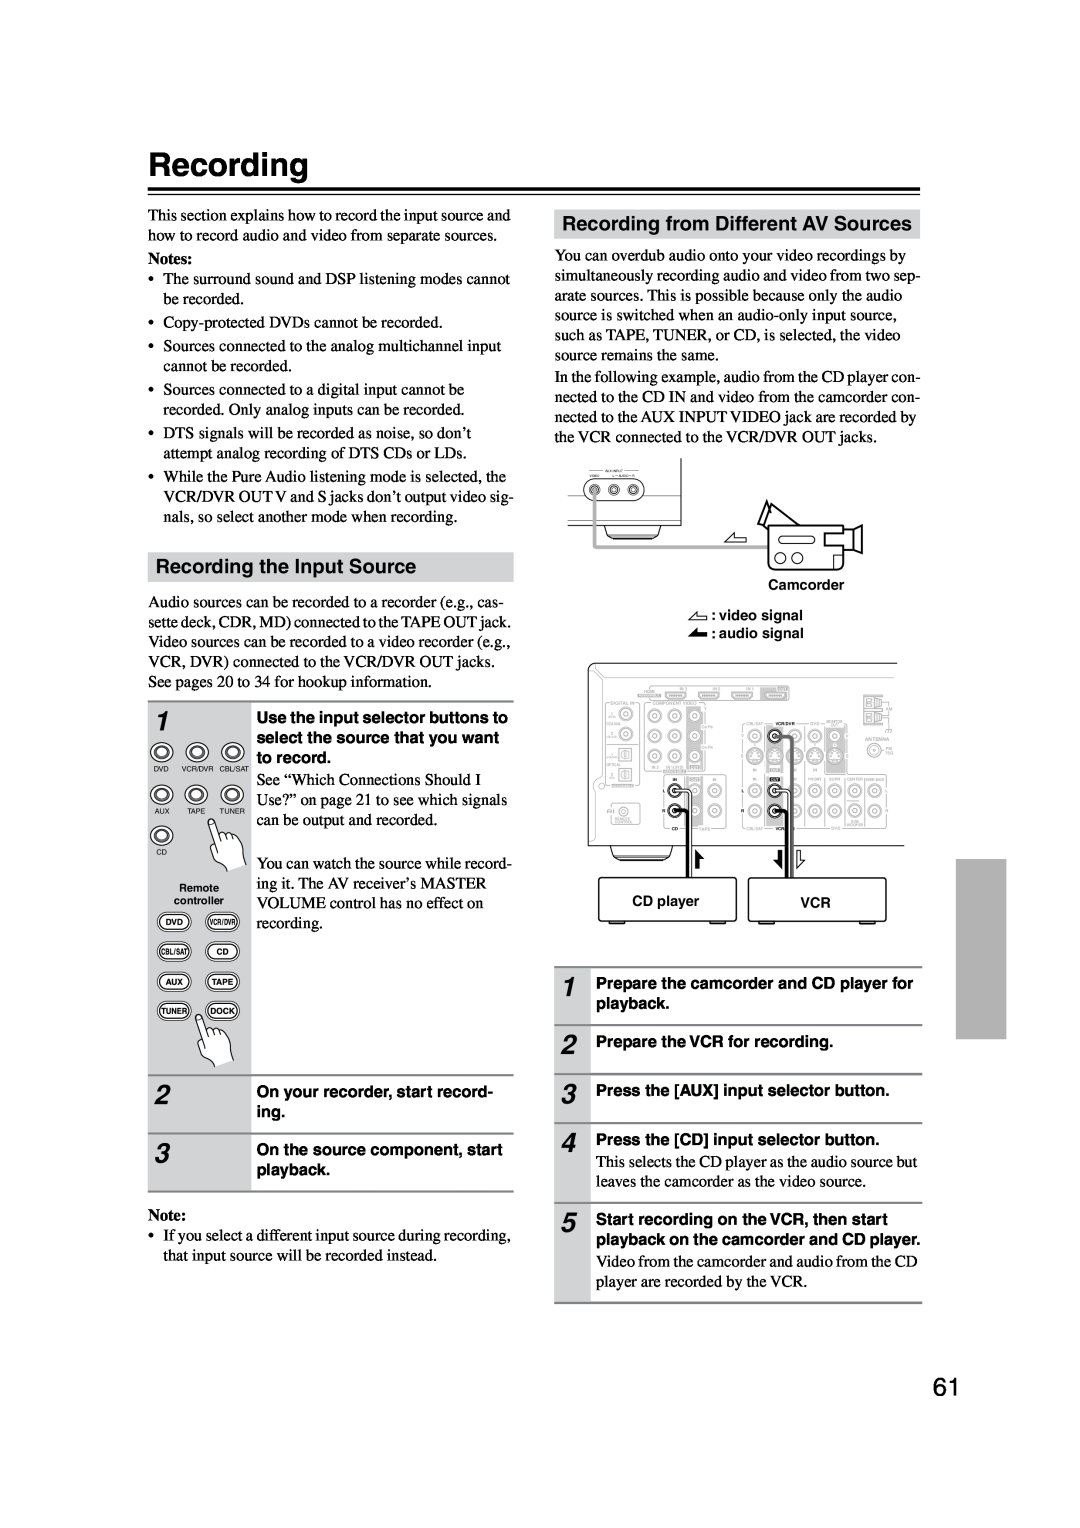 Onkyo TX-SR576, TX-SR506 instruction manual Recording the Input Source, Recording from Different AV Sources, Notes 